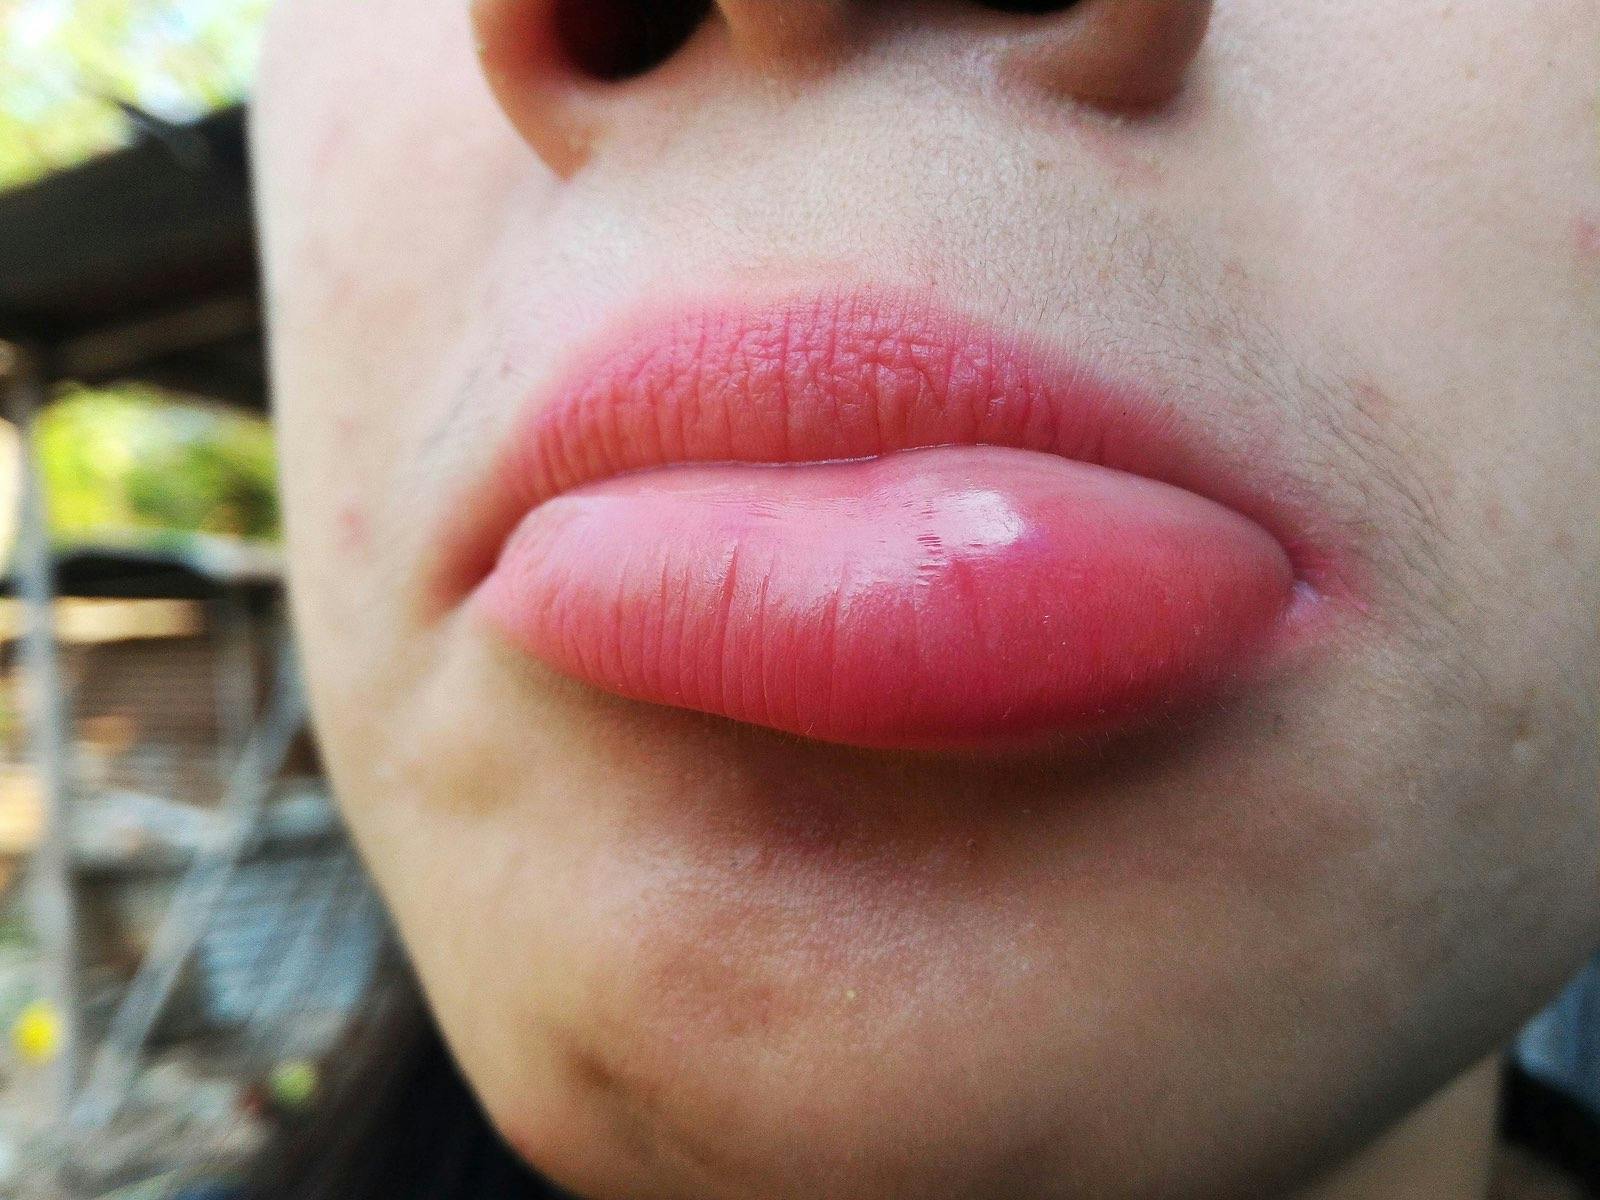 person with swollen lip called angioedema